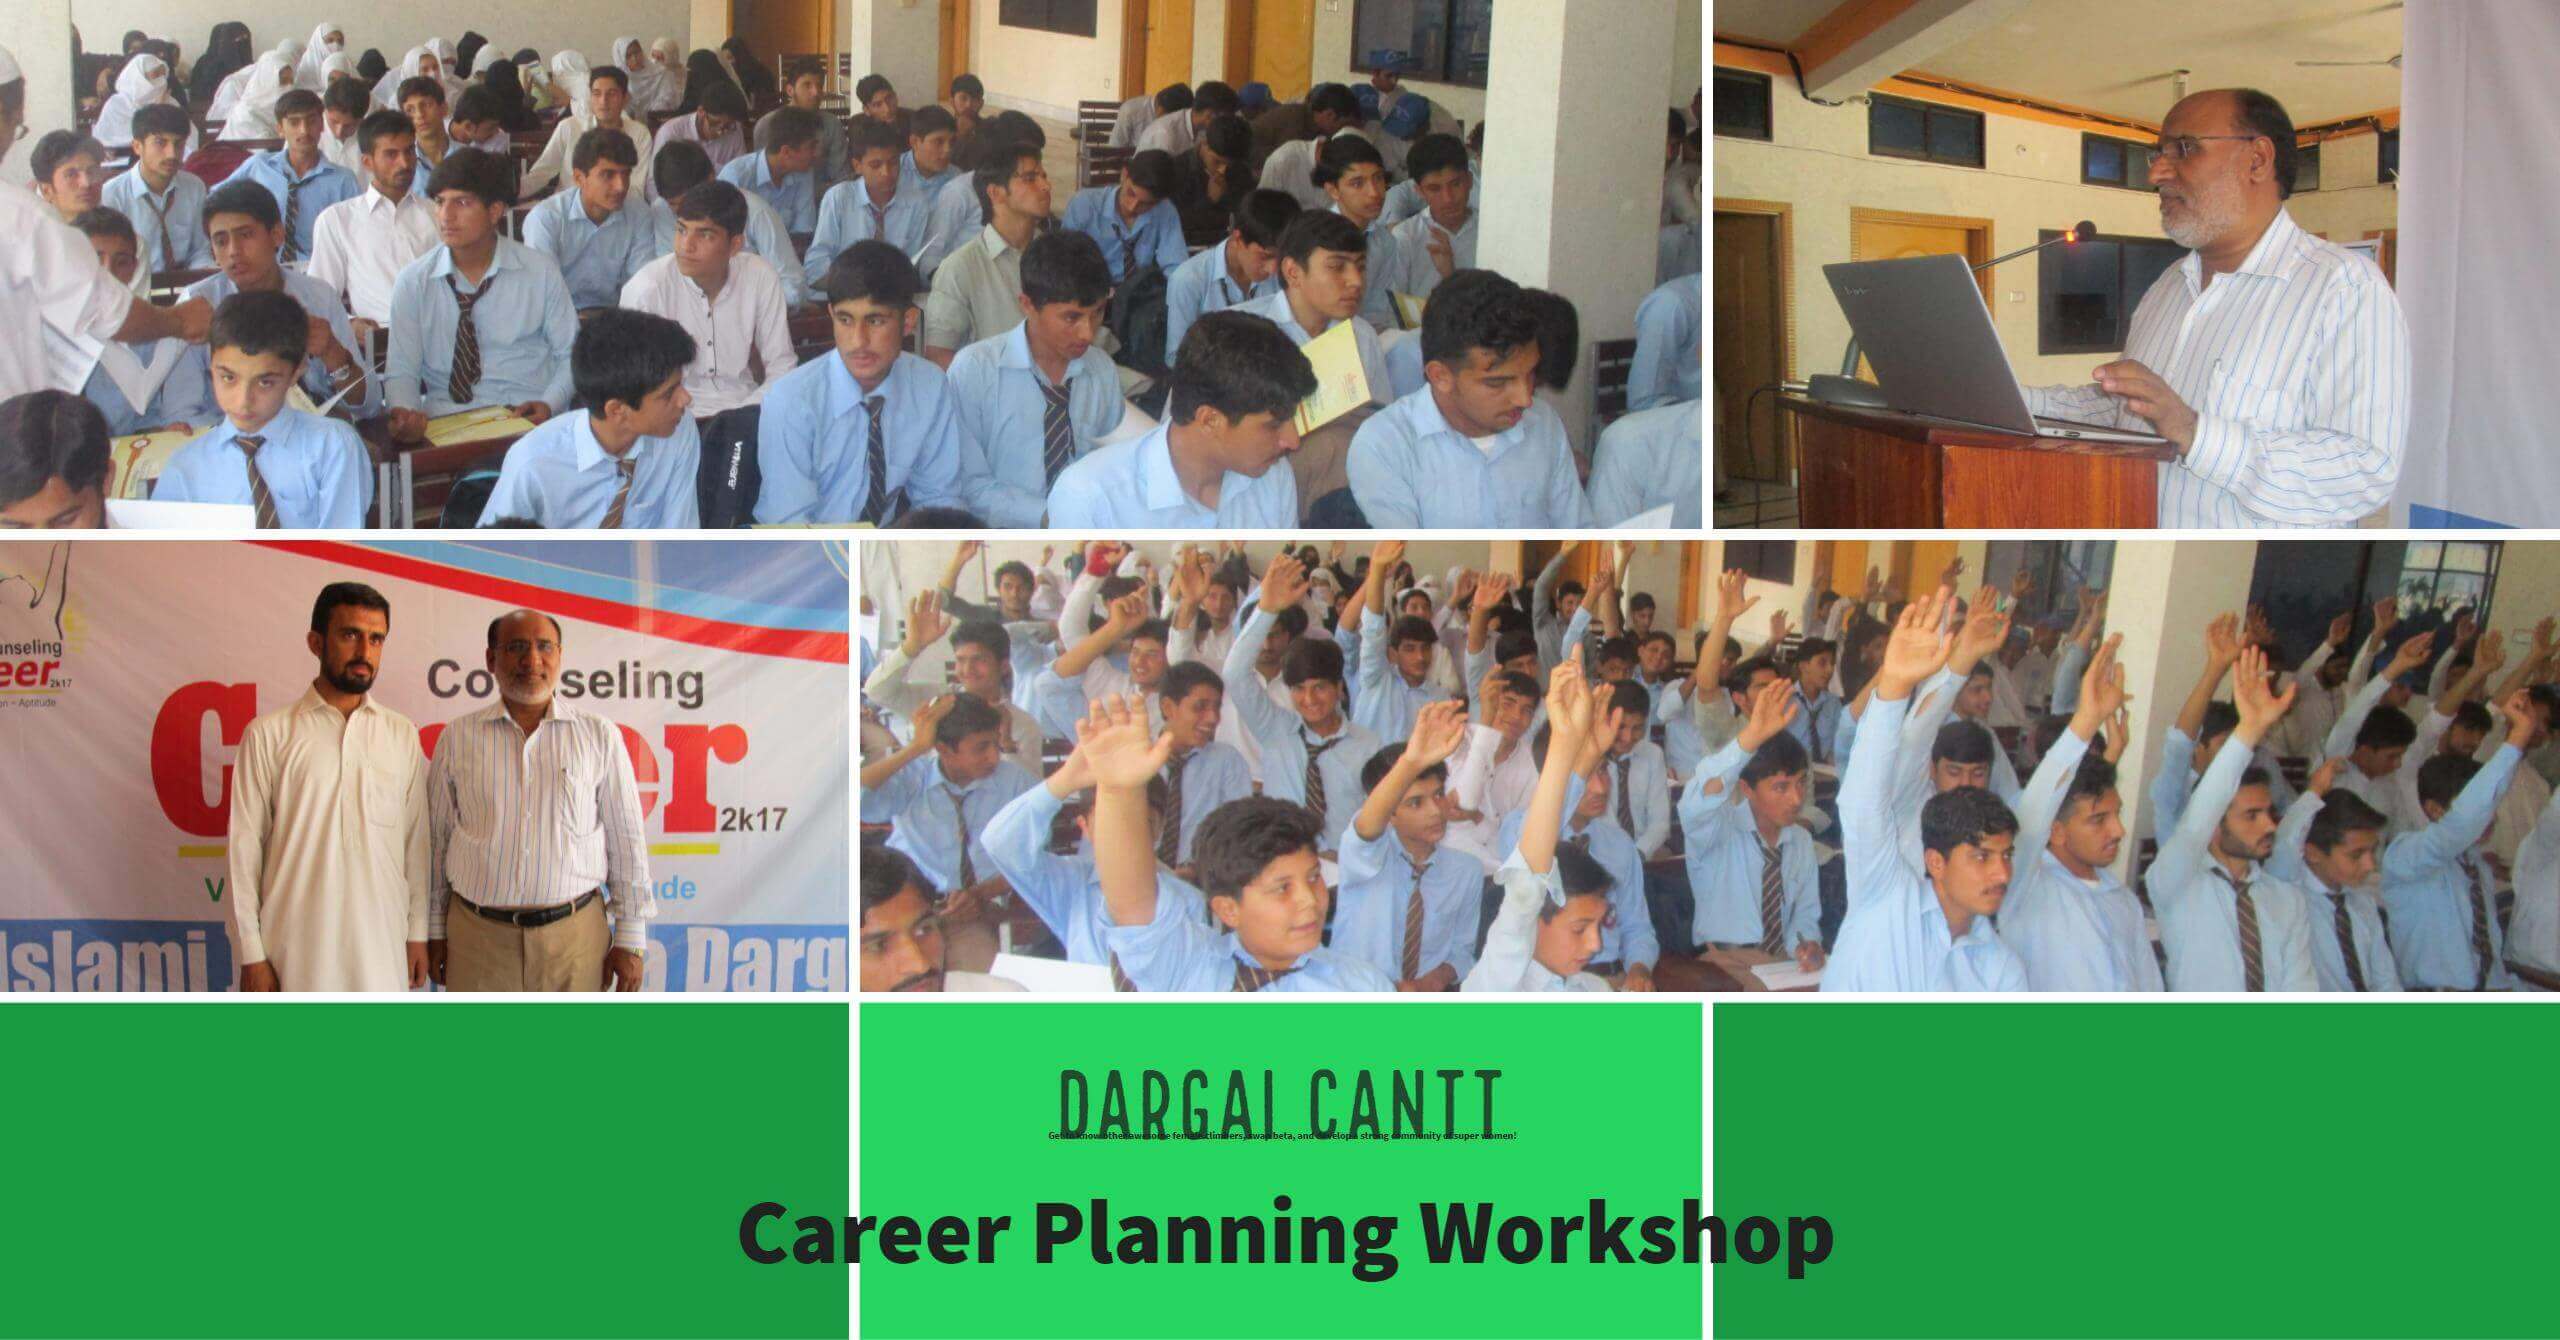 Seminar on Career Counseling in Malakand